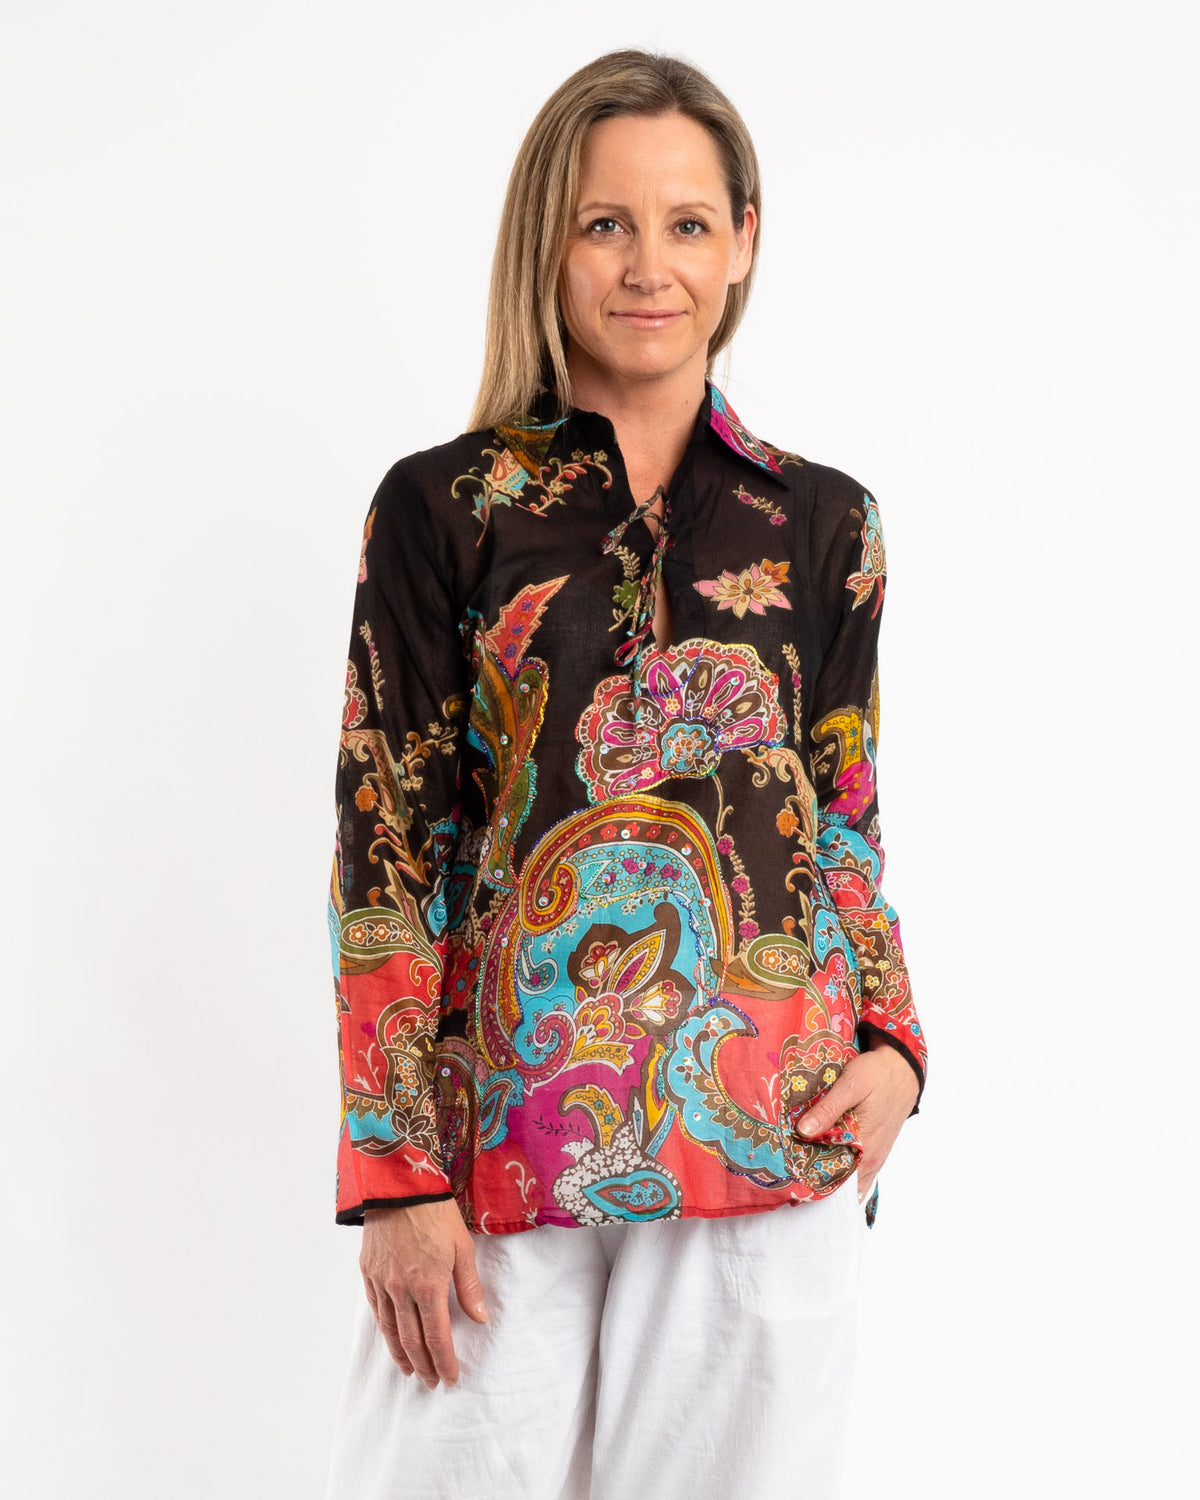 Collared Long Sleeve Top in Paisley Black Floral